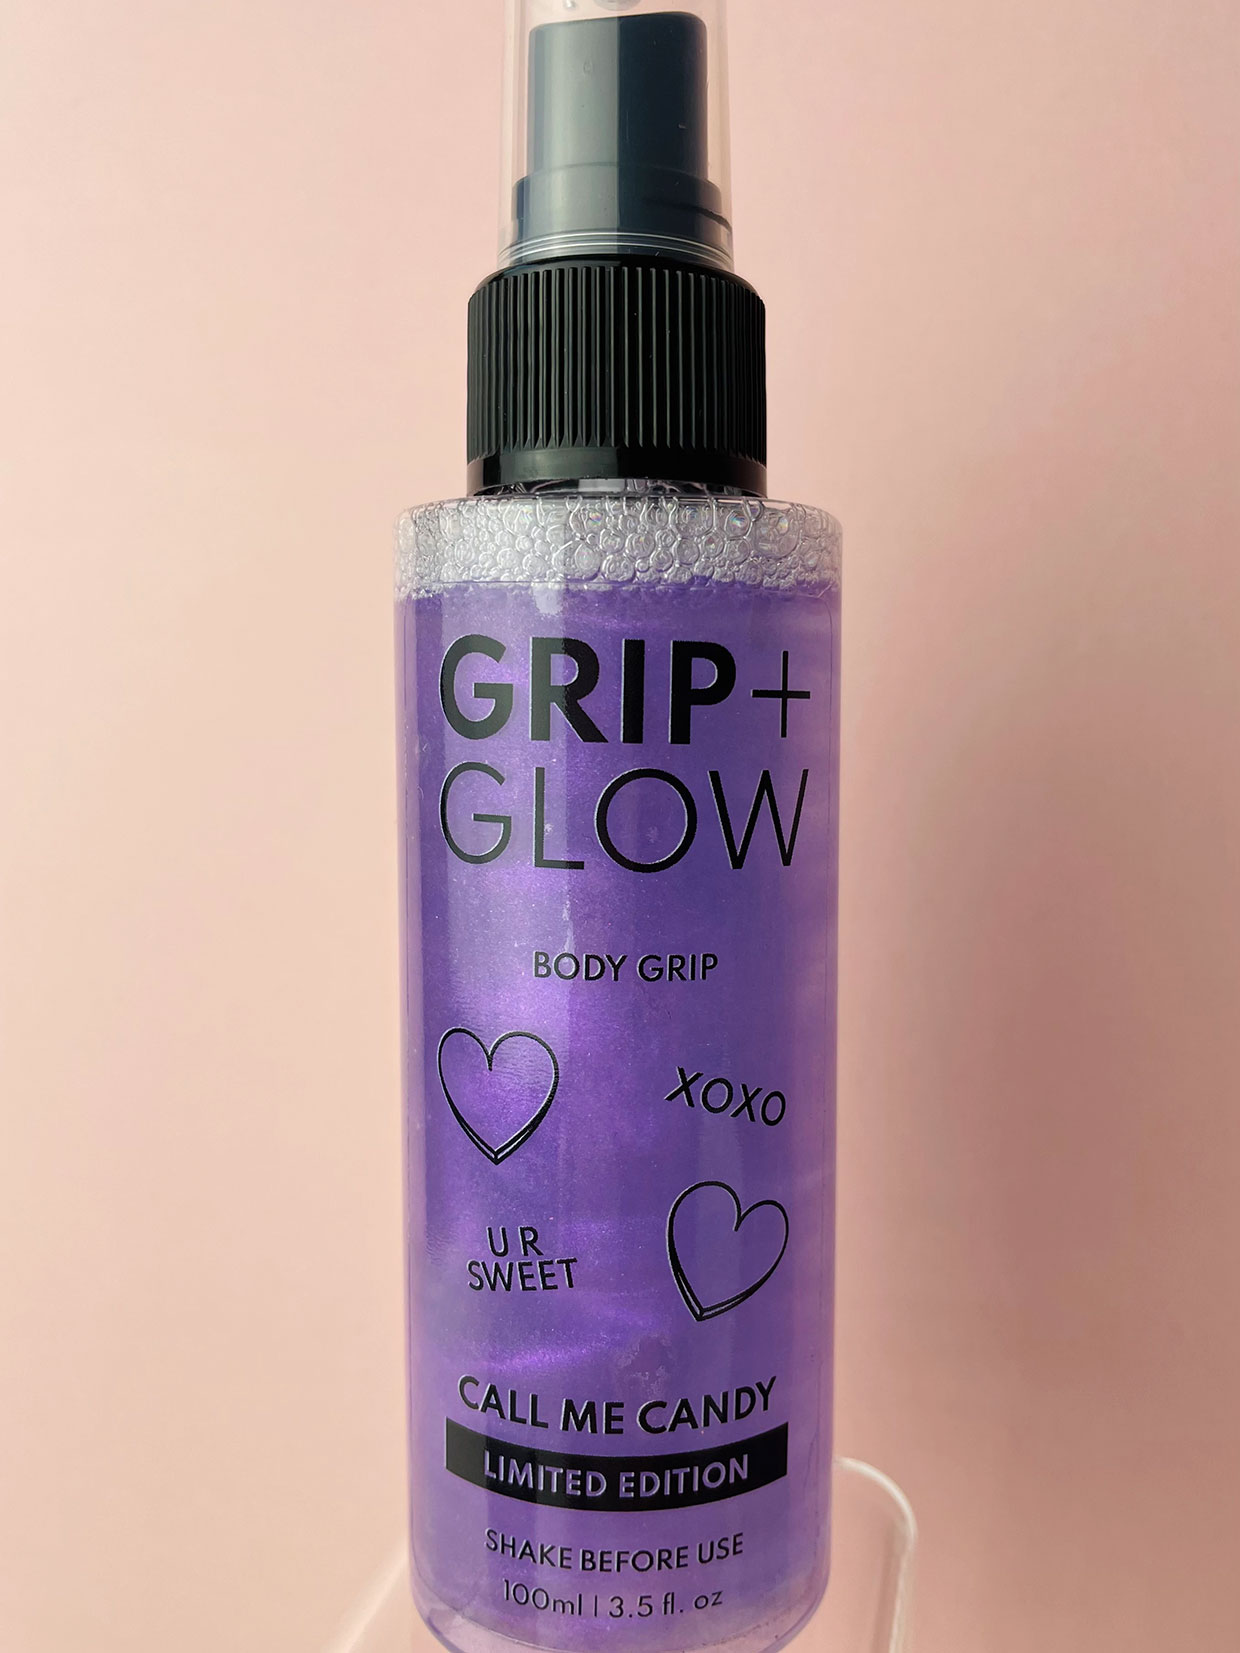 Grip and Glow - Body Grip - Call me Candy 100ml